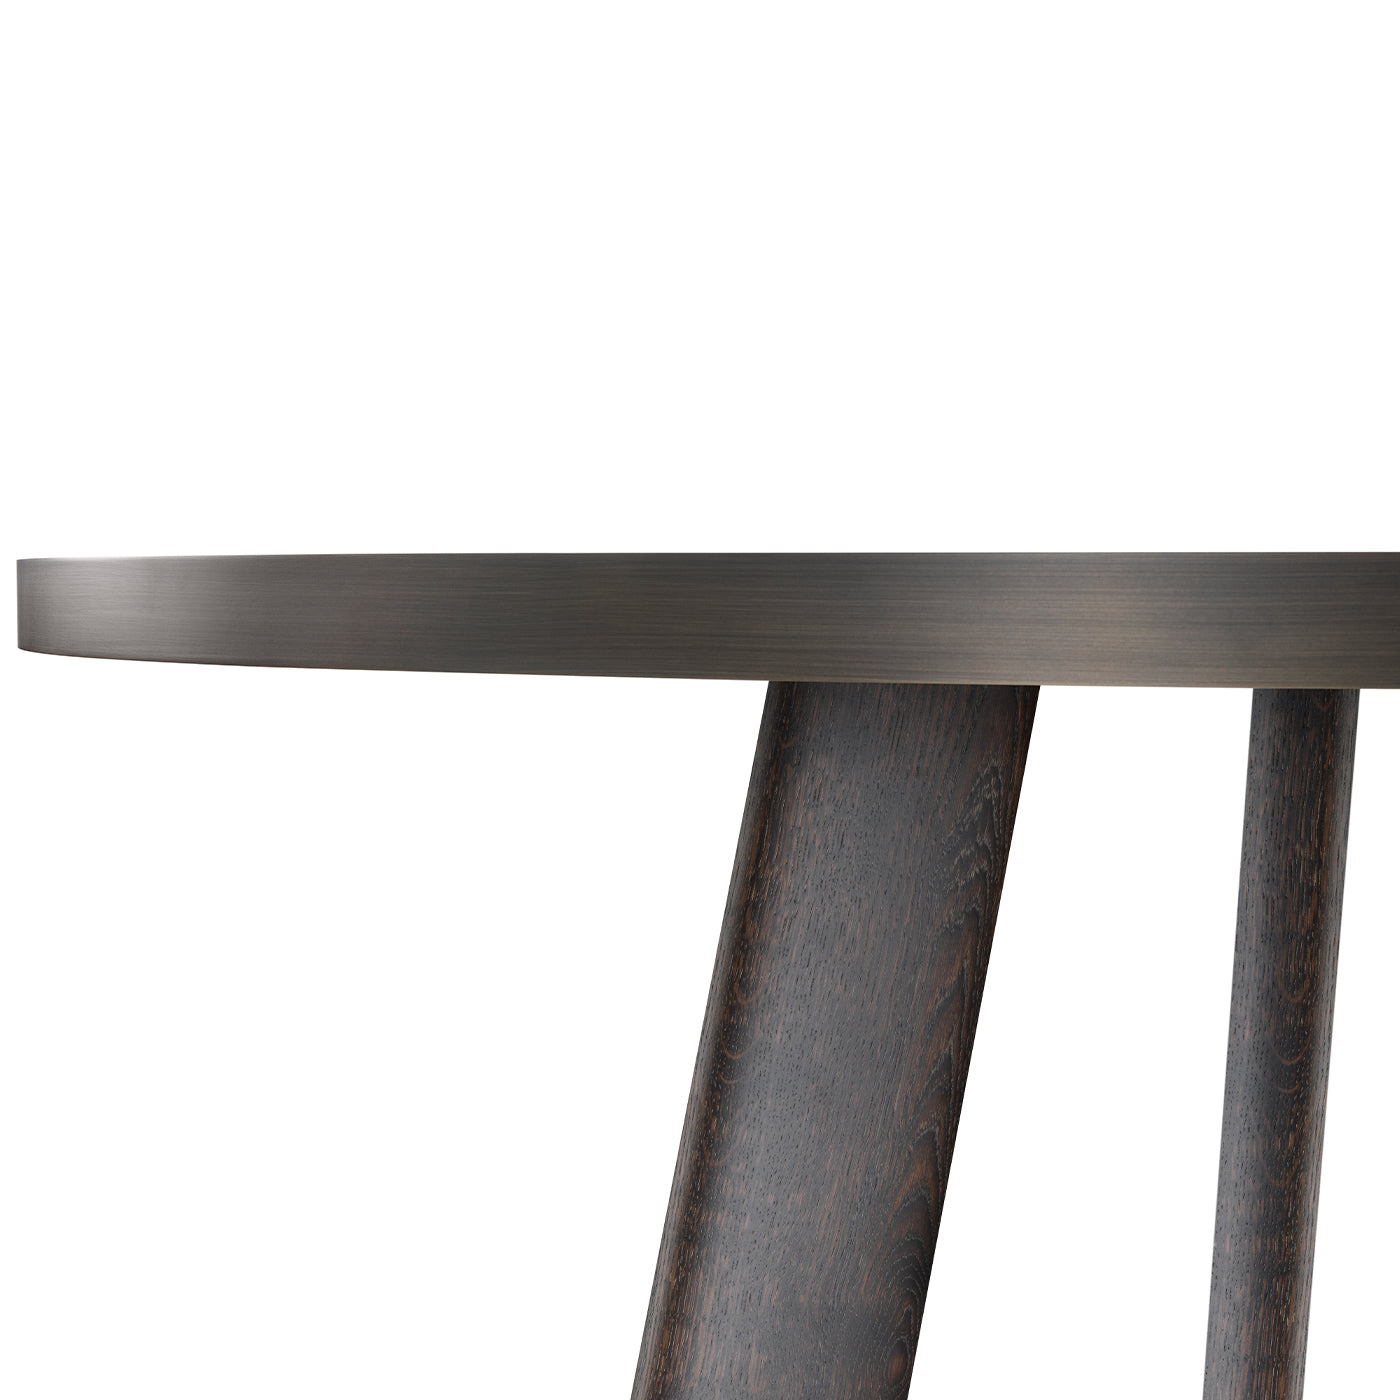 Native Round Brown Table by Stefano Giovannoni - Alternative view 1